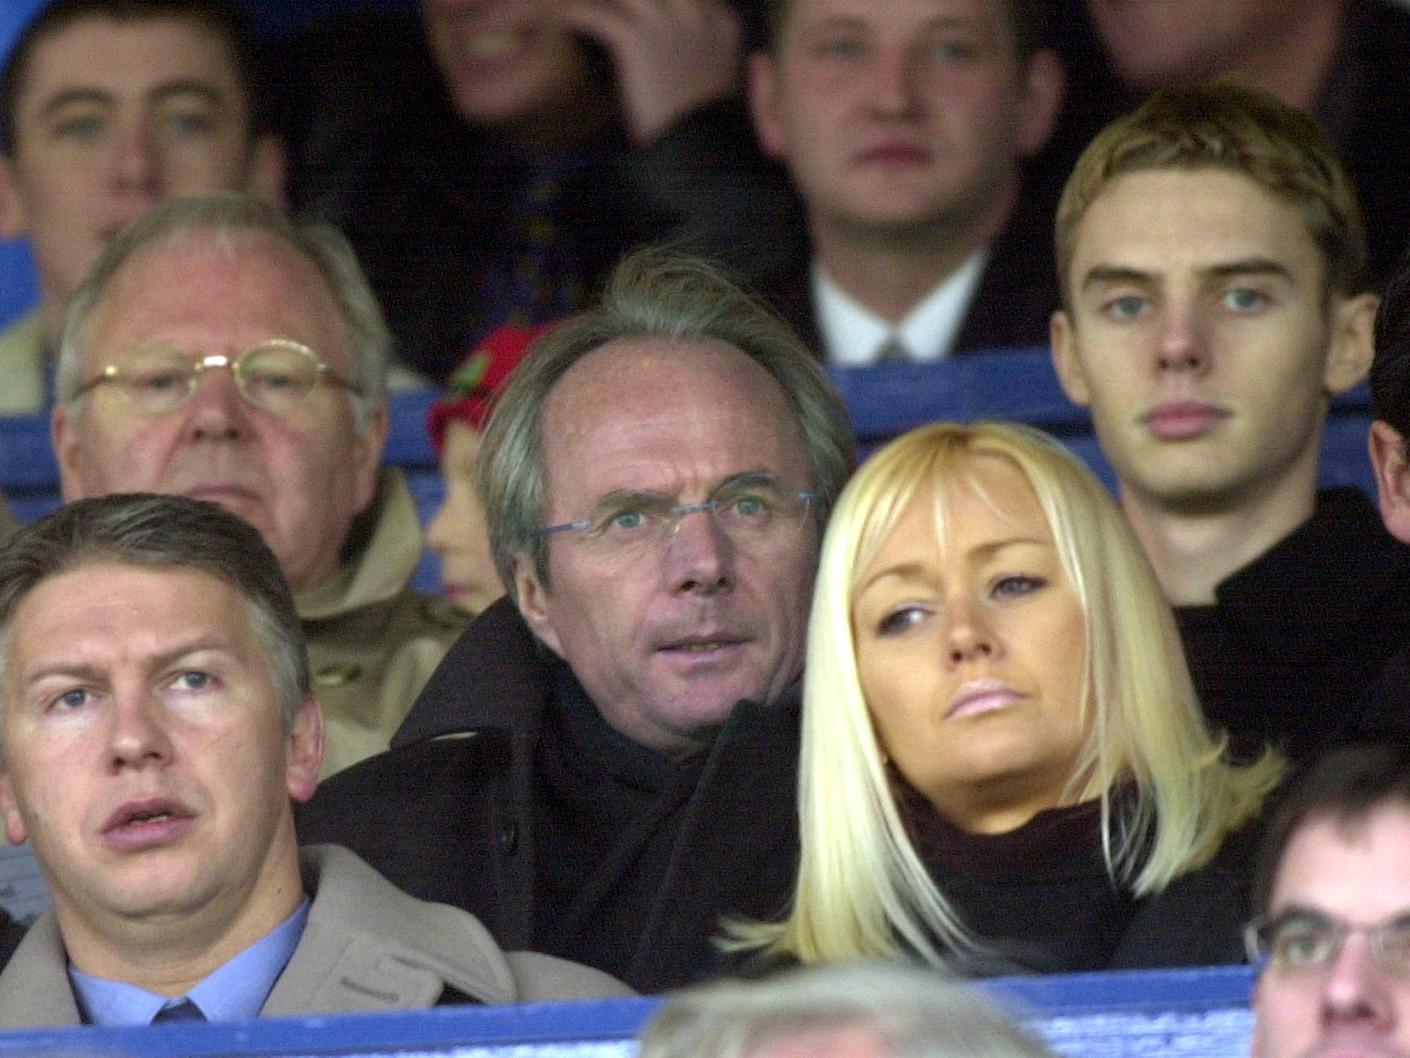 Newly appointed Three Lions coach Sven Goran Eriksson was at Elland Road to watch Leeds United's FA Cup fourth round clash against Liverpool. The game ended 0-0.